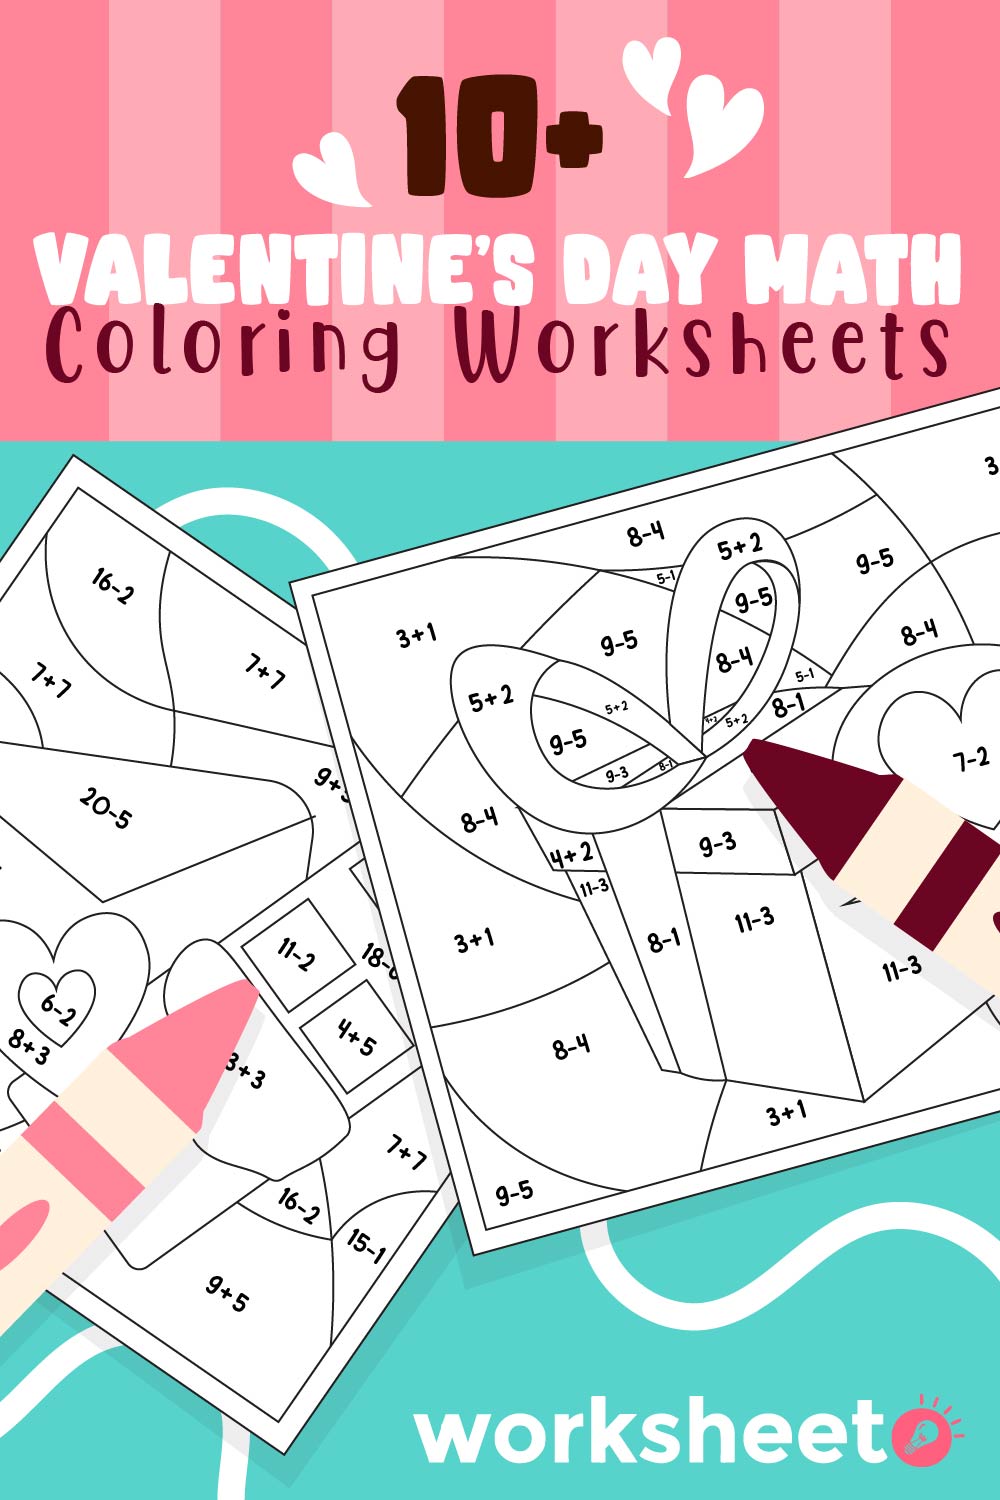 17 Images of Valentines Day Math Coloring Worksheets